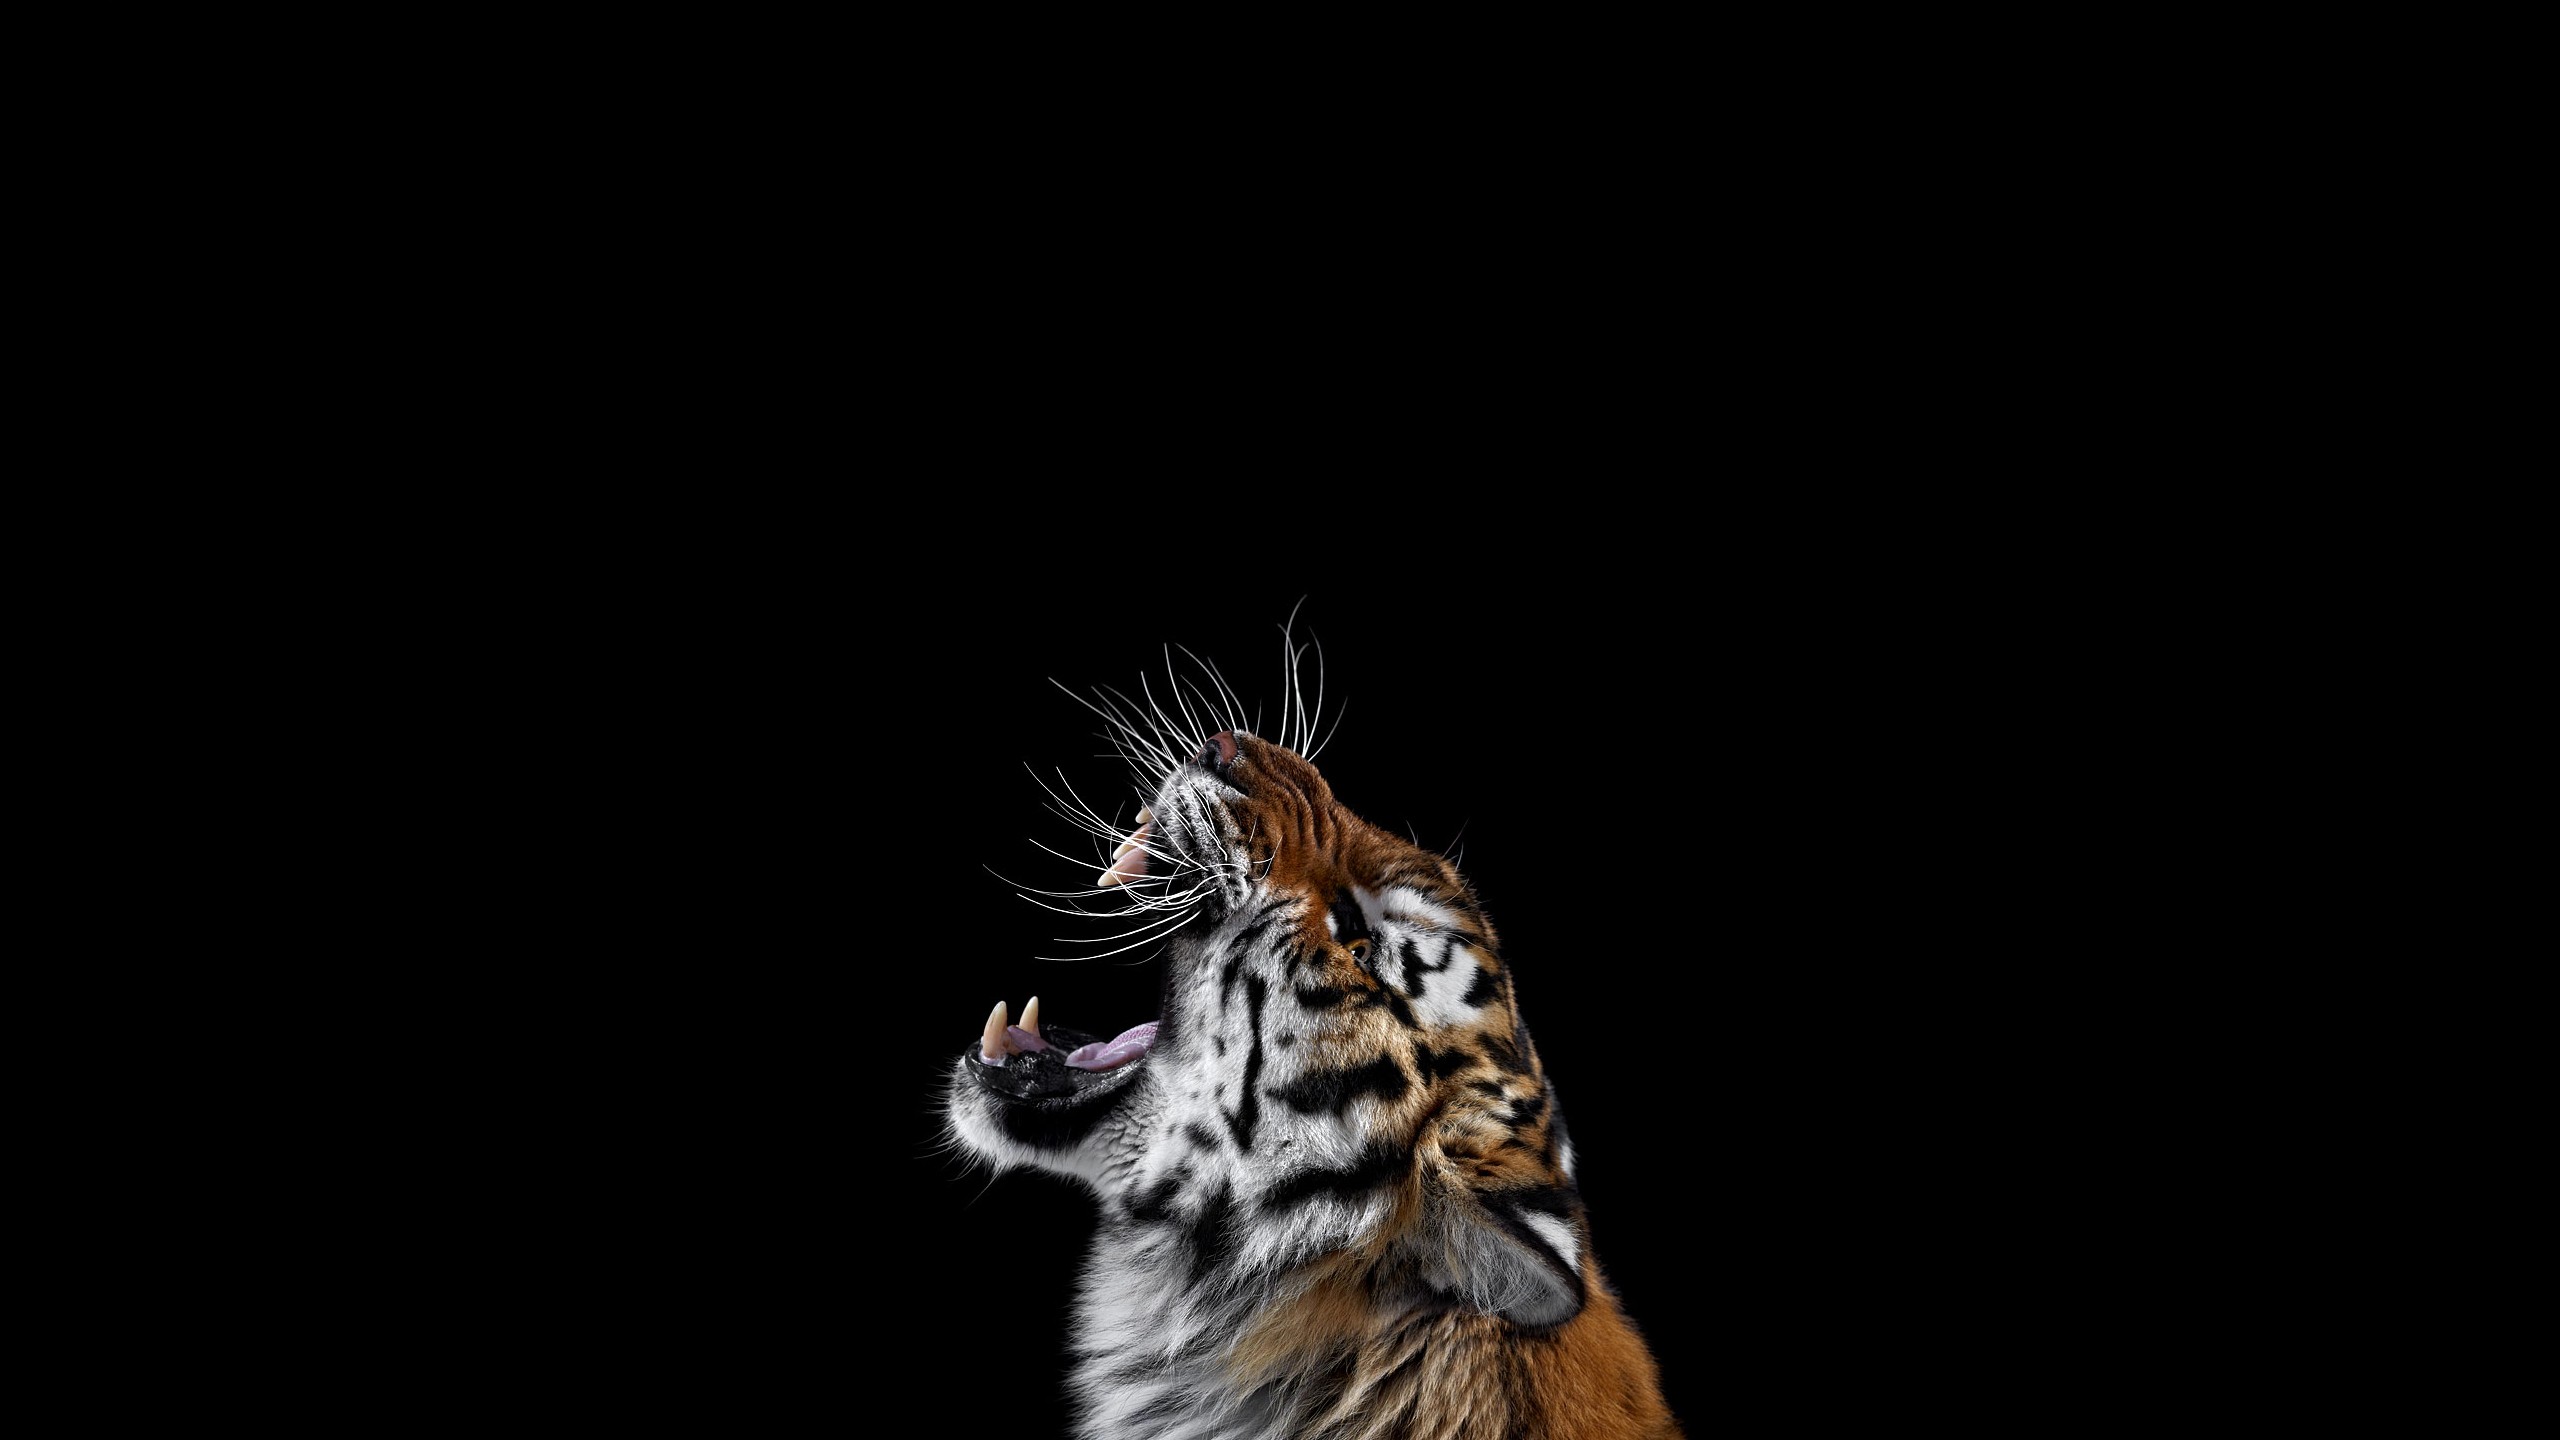 General 2560x1440 tiger simple background big cats animals mammals black background fangs